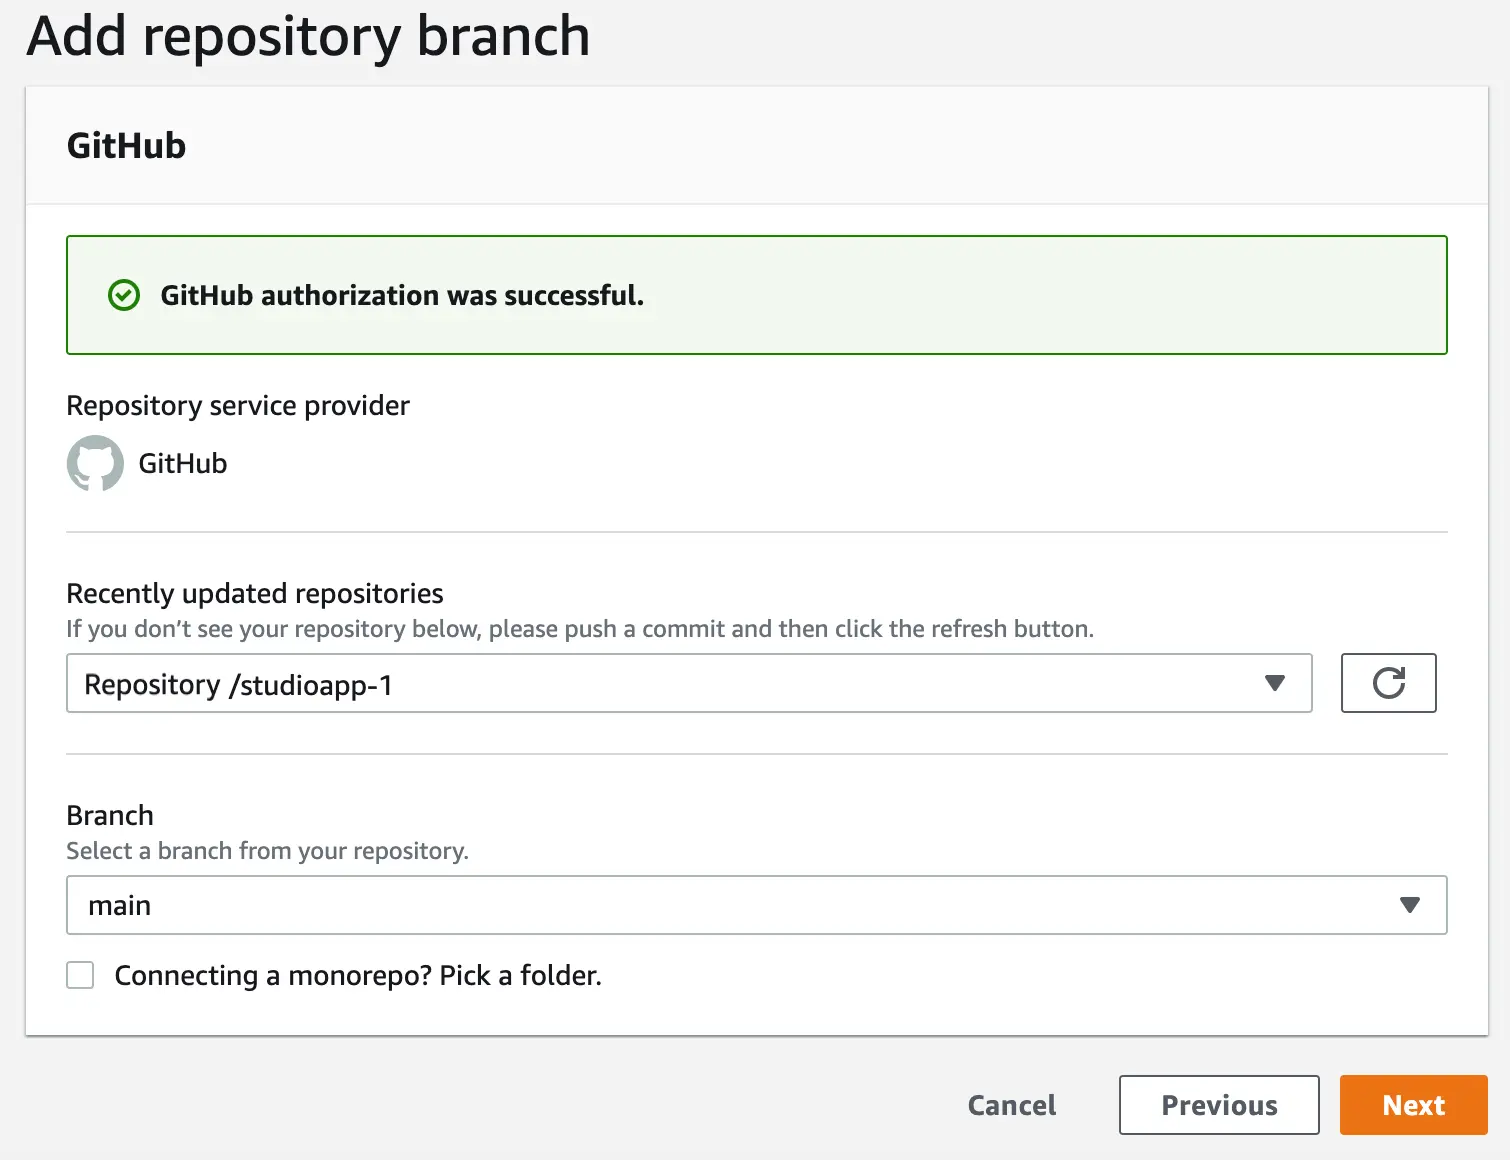 Adding a repository through the Amplify Hosting form, including selecting a repository provider and a branch name.